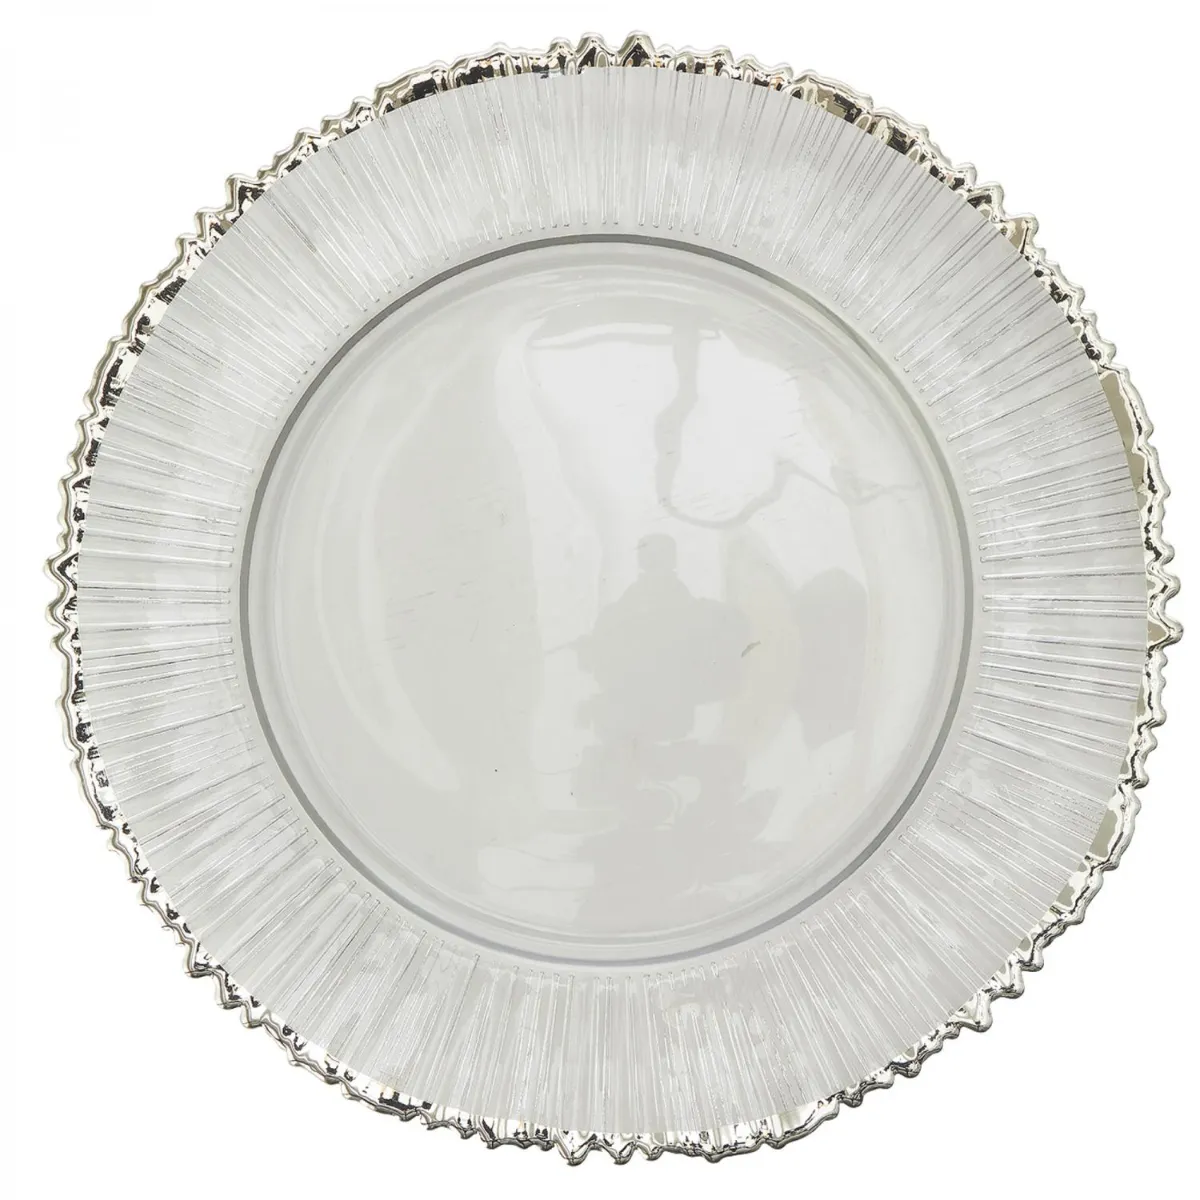 Beautiful Luxury Handmade Charger Plates With Premium Quality From Indian Manufacturer In Reasonable Price